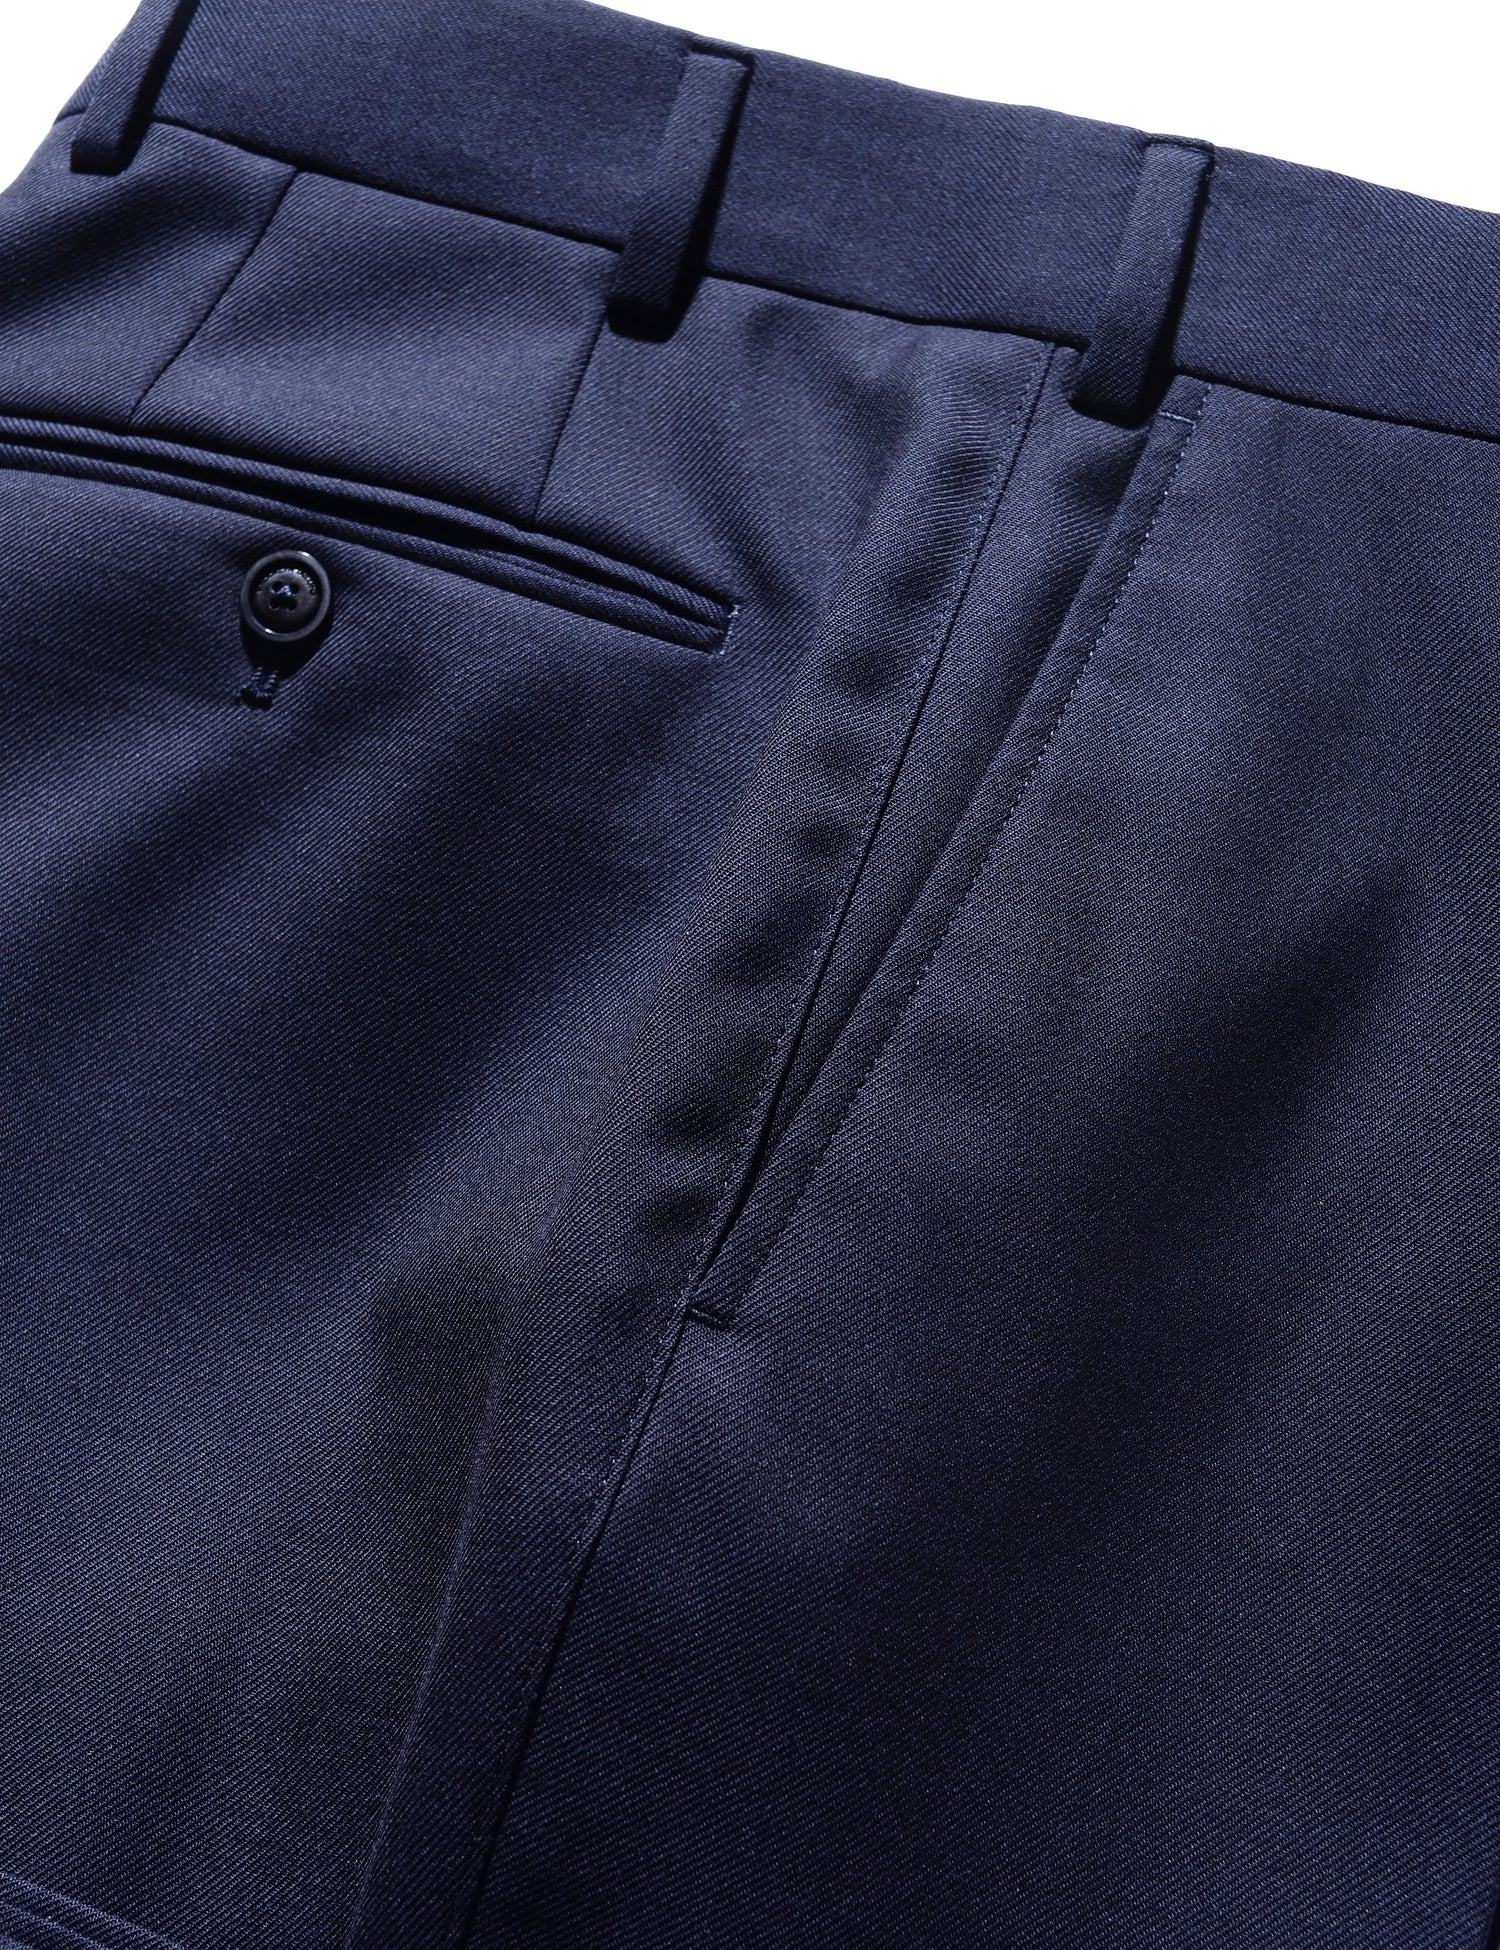 Detail of side of Brooklyn Tailors BKT36 Straight Leg Trouser in Sturdy Wool Twill - Midnight Blue showing waistband, back pocket, side pocket, and fabric texture